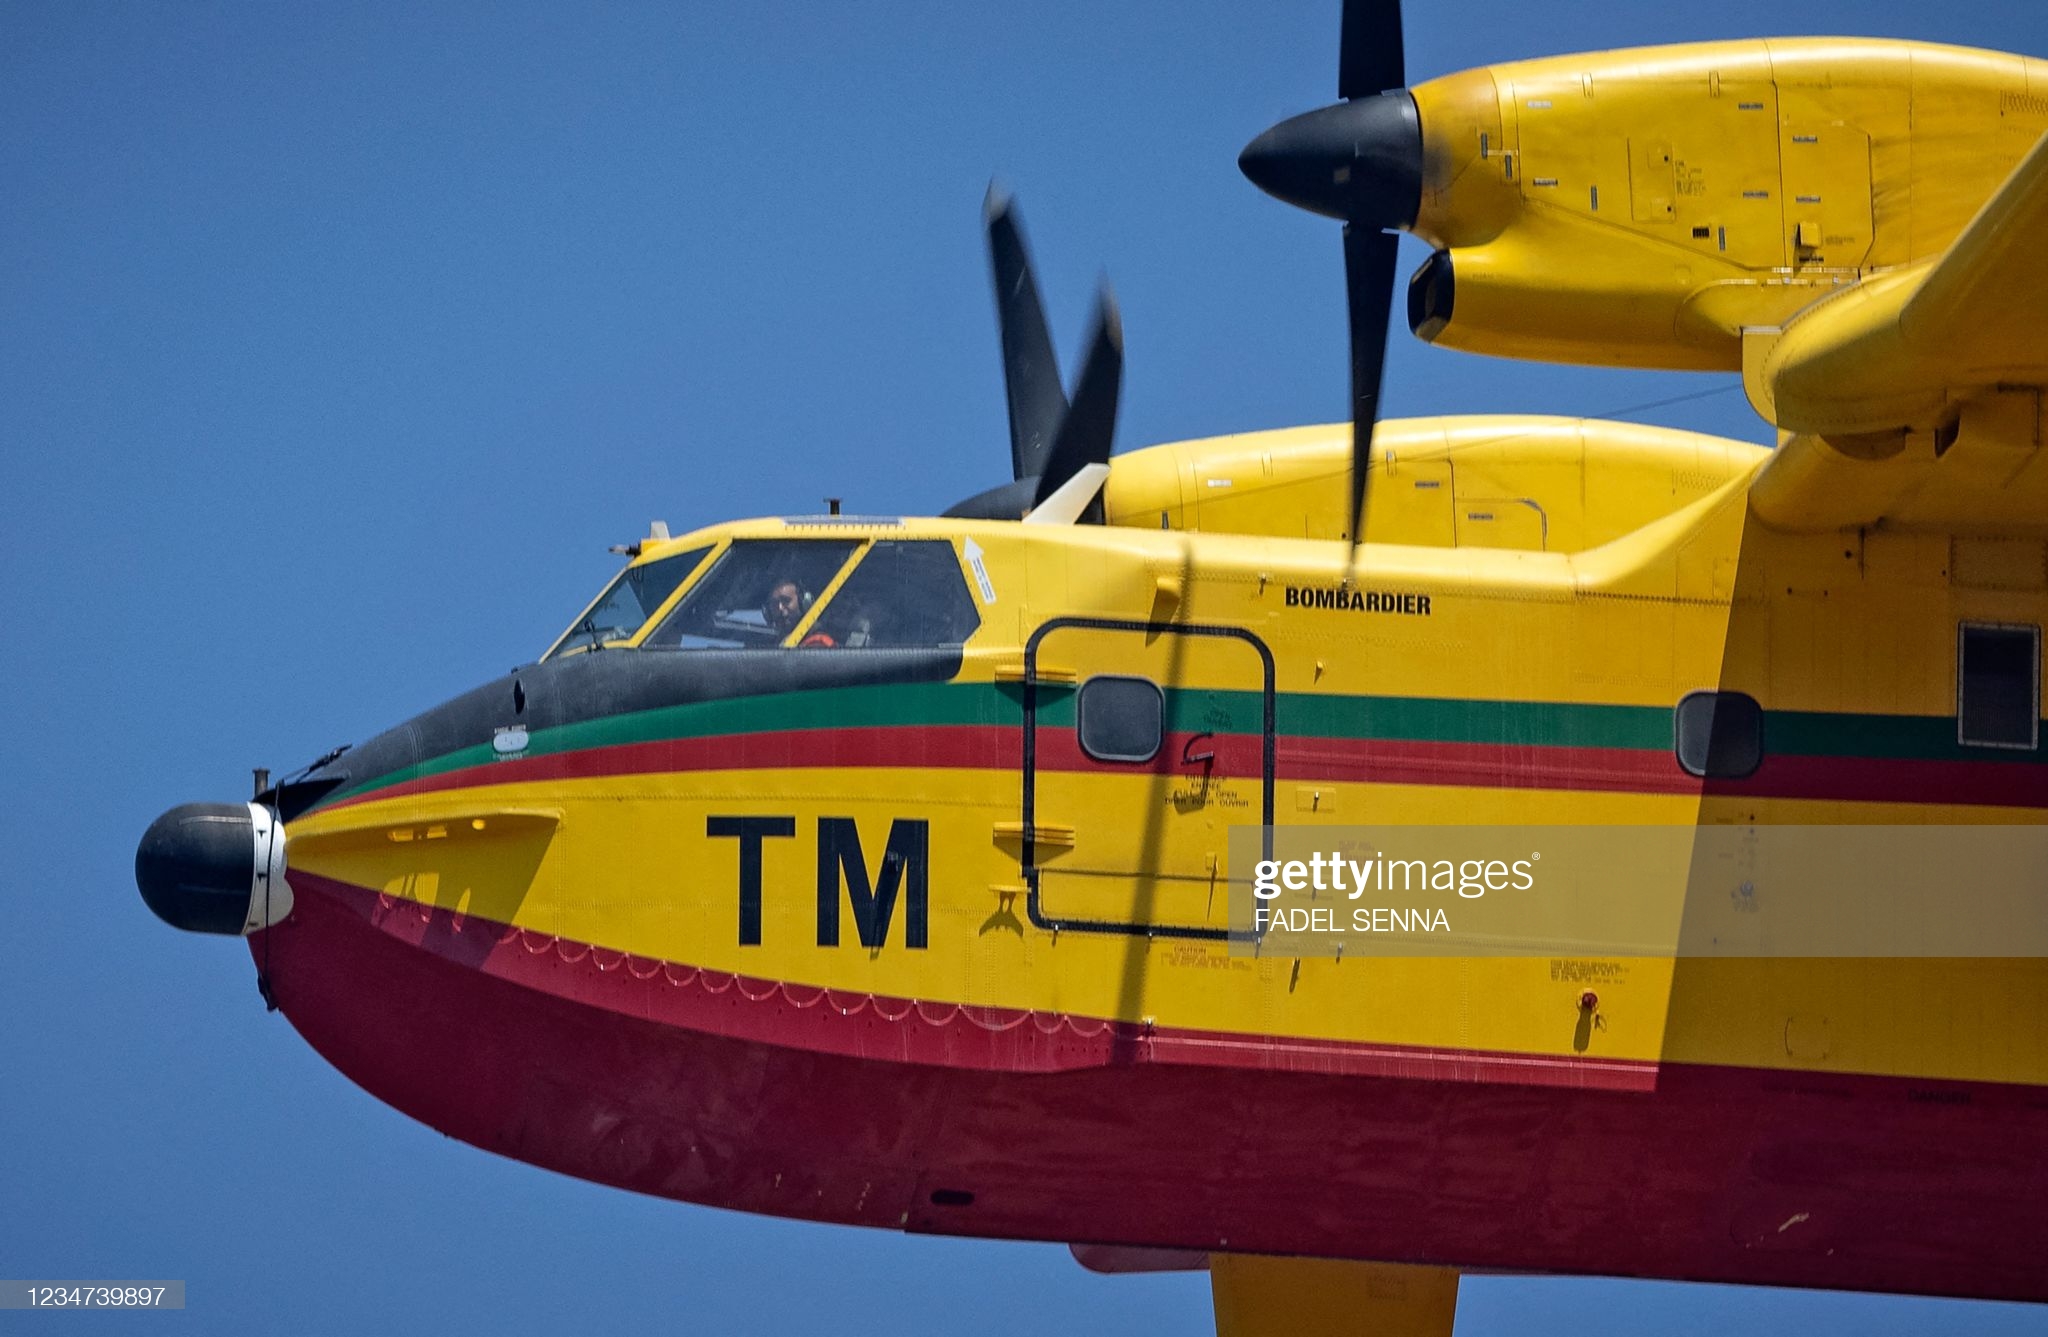 Canadair CL-415 - Page 8 Gettyi20